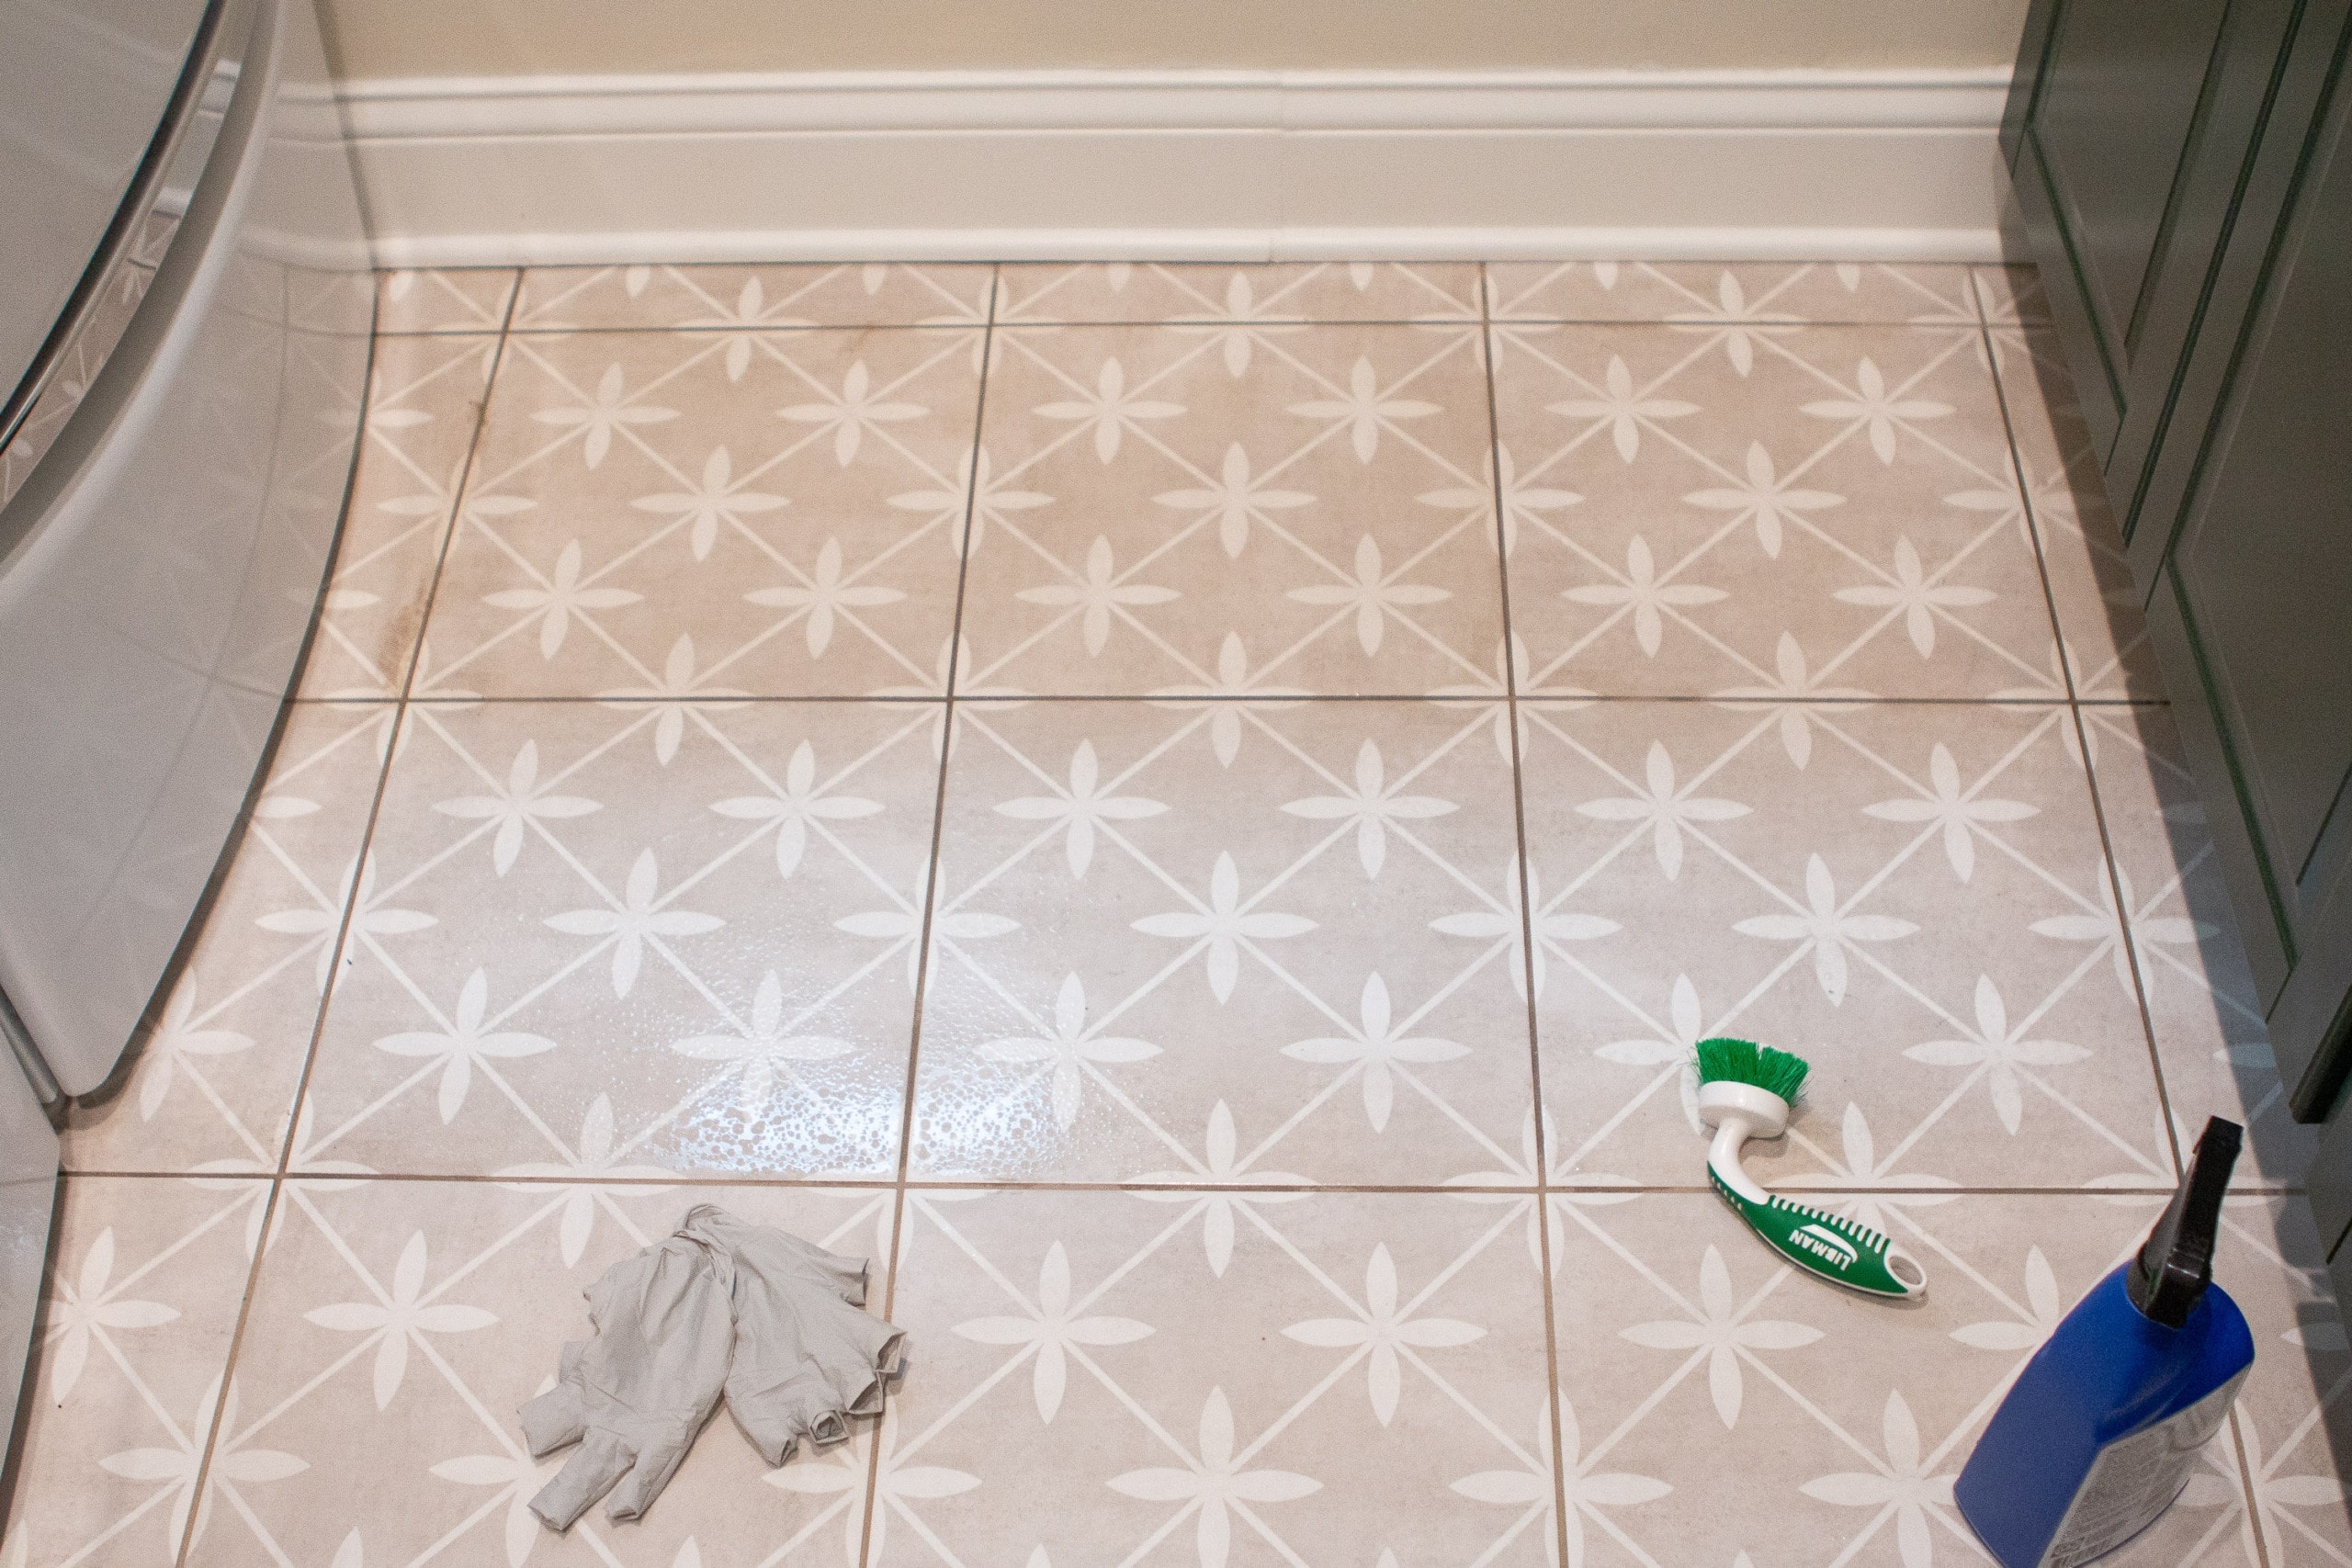 Clean And Seal Porcelain Tile Grout, What Do You Use To Seal Porcelain Tile